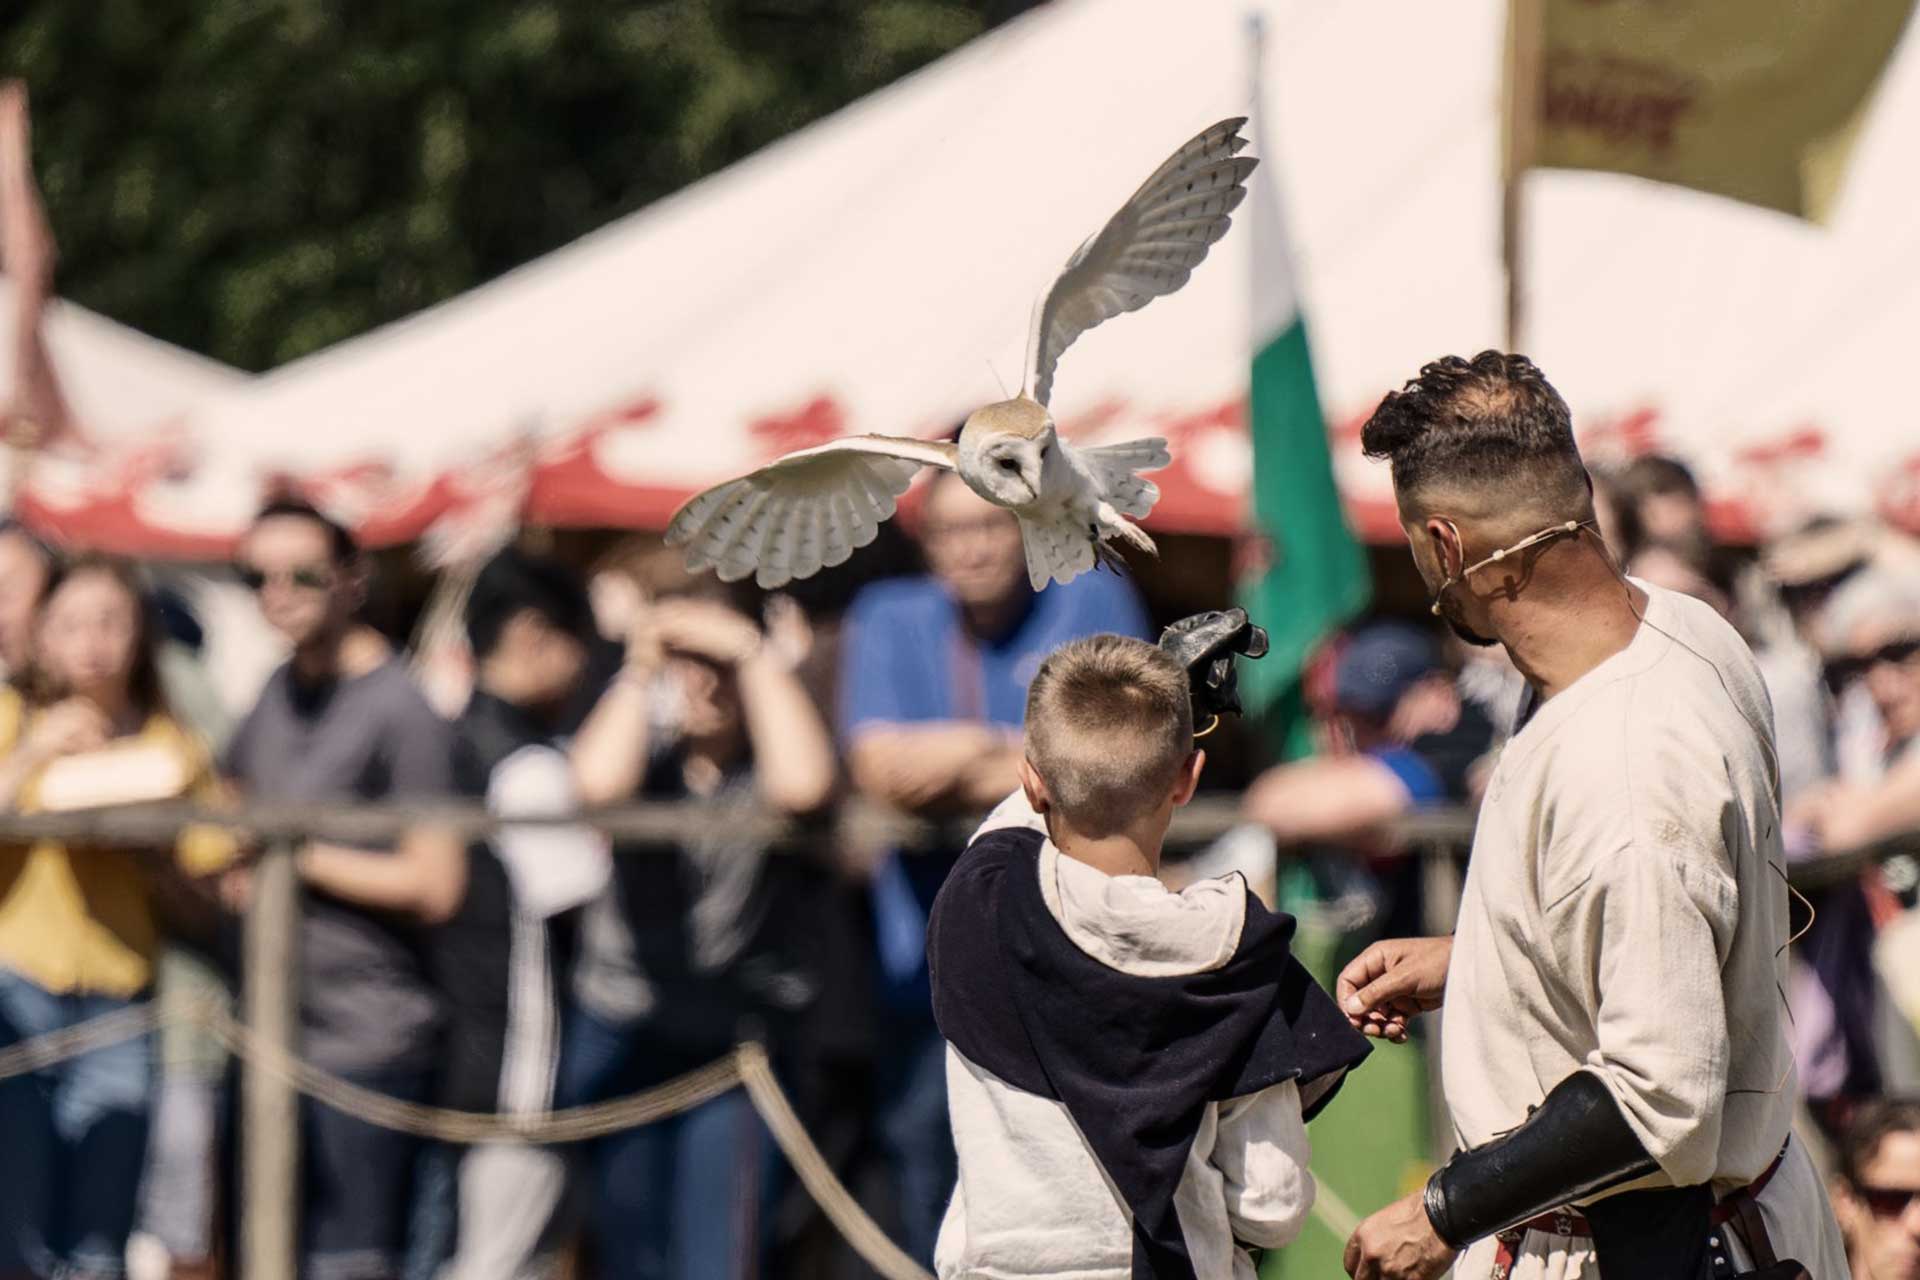 Falconry experience at the Loxwood Joust Festival